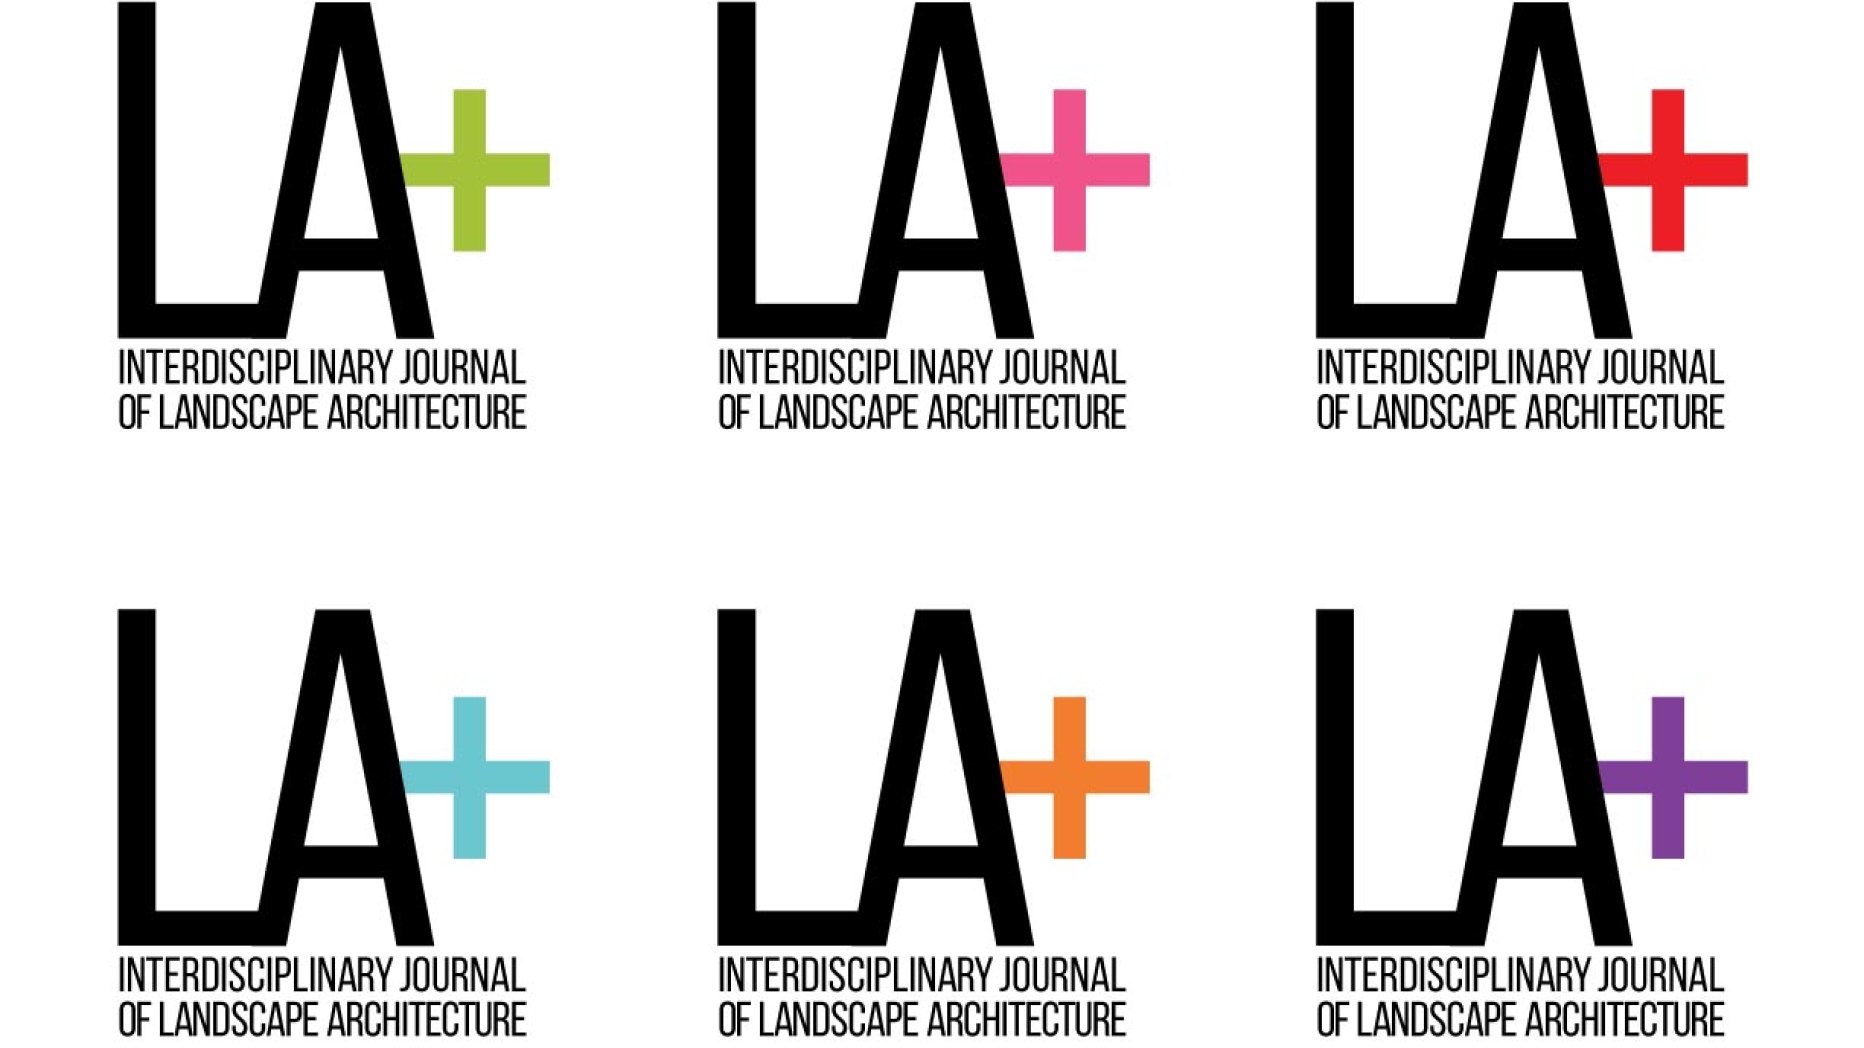 LA+ logo with different colors for the plus sign